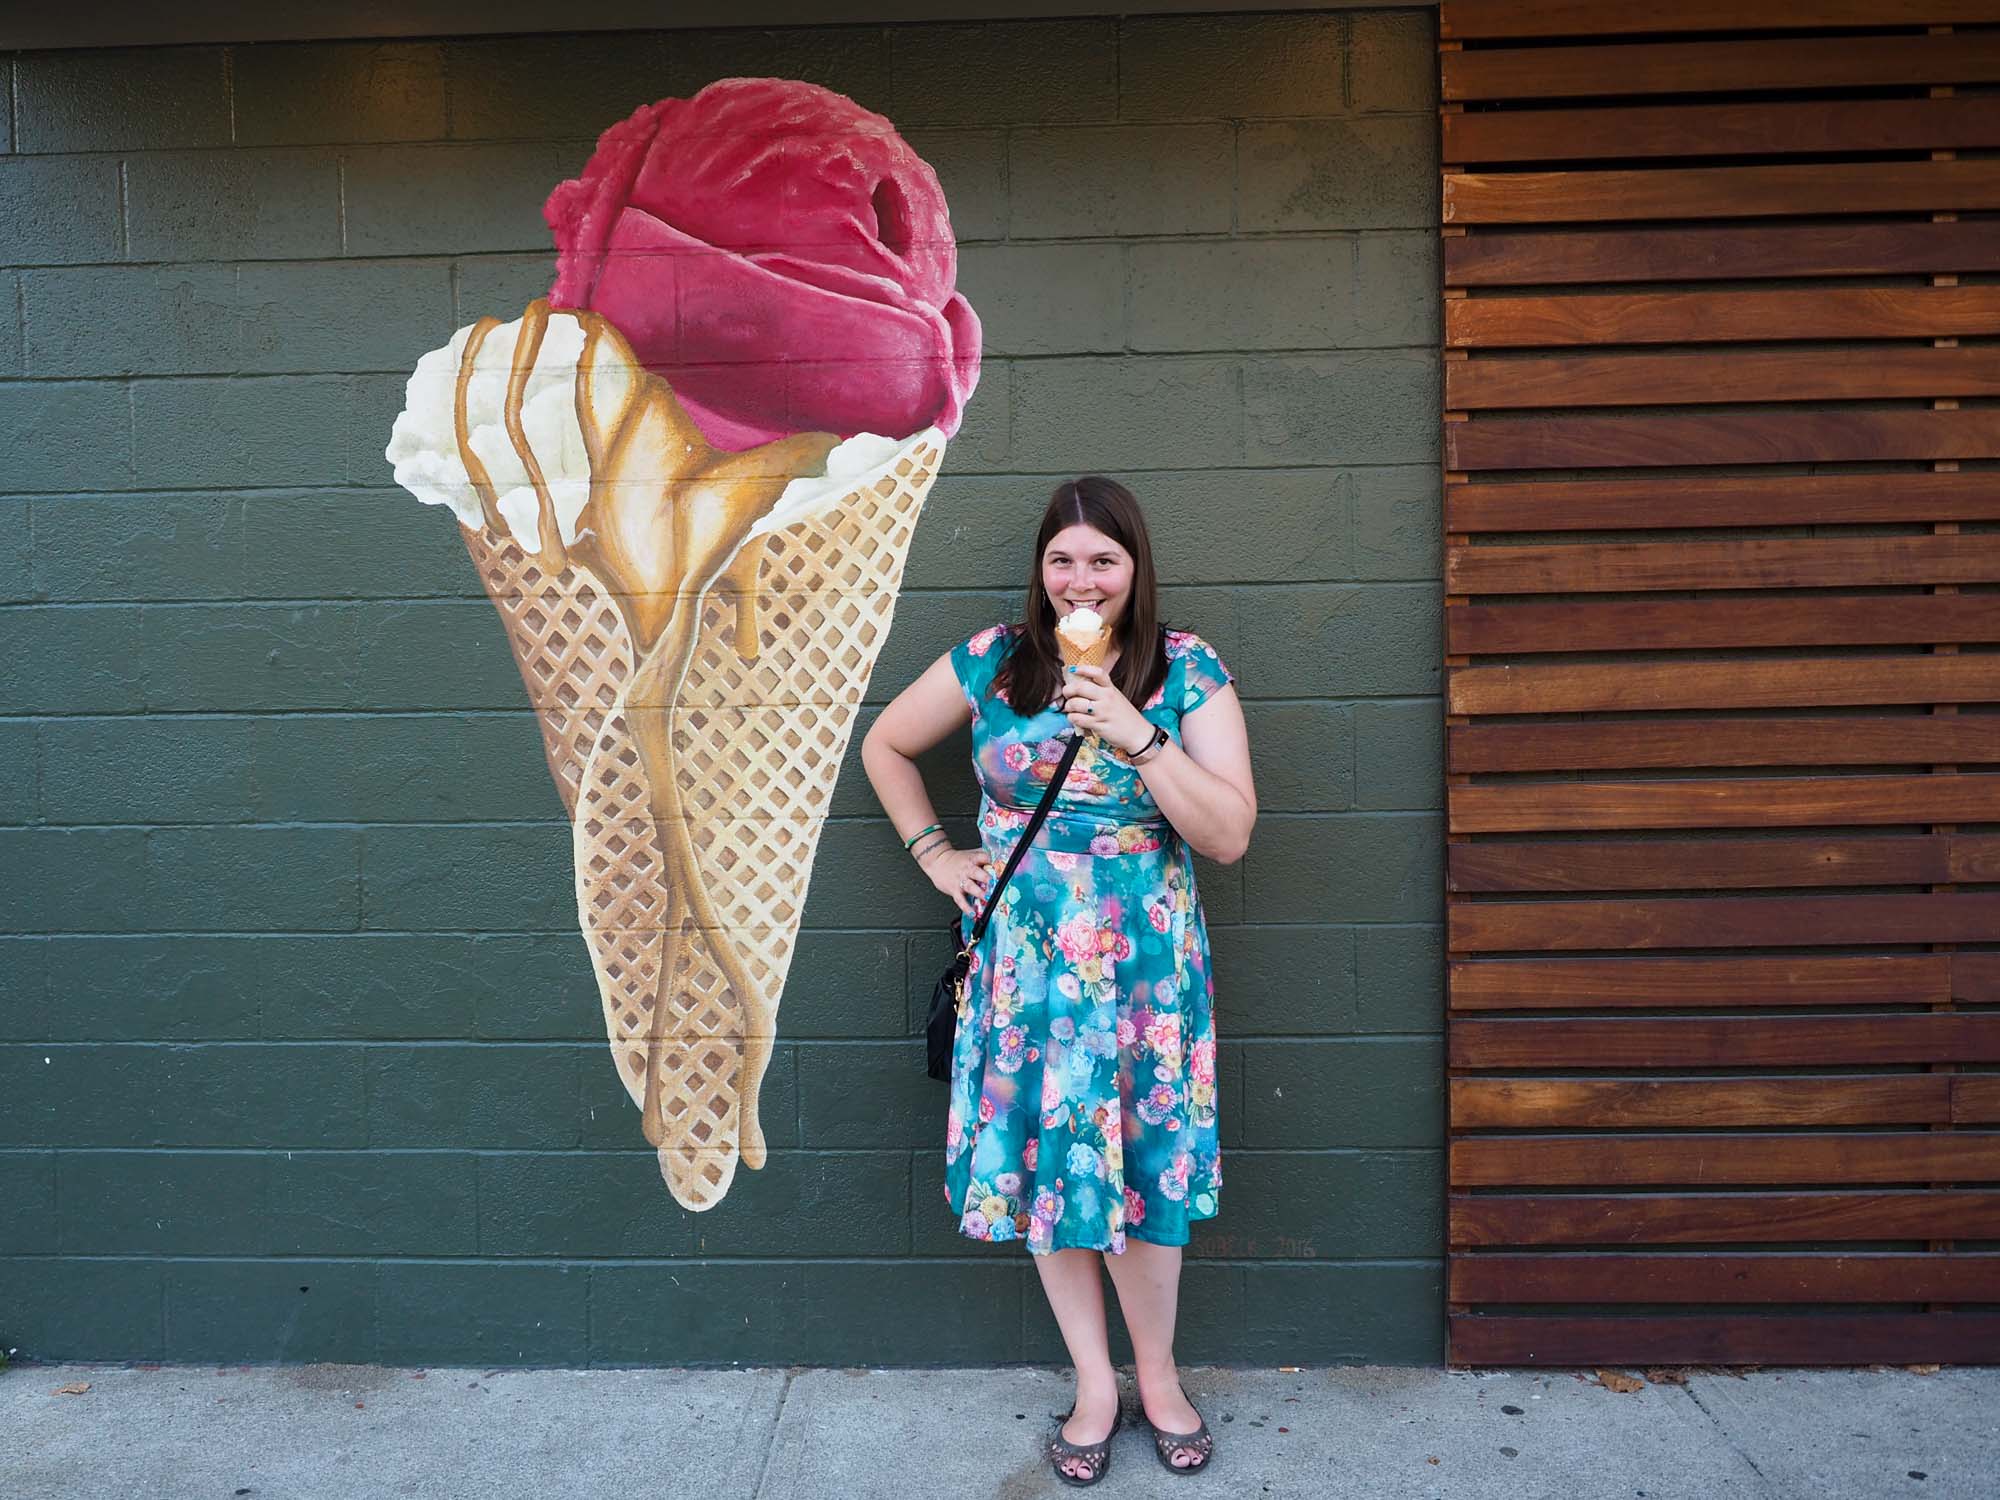 Read more about the article Where to Find the Best Ice Cream in Cleveland